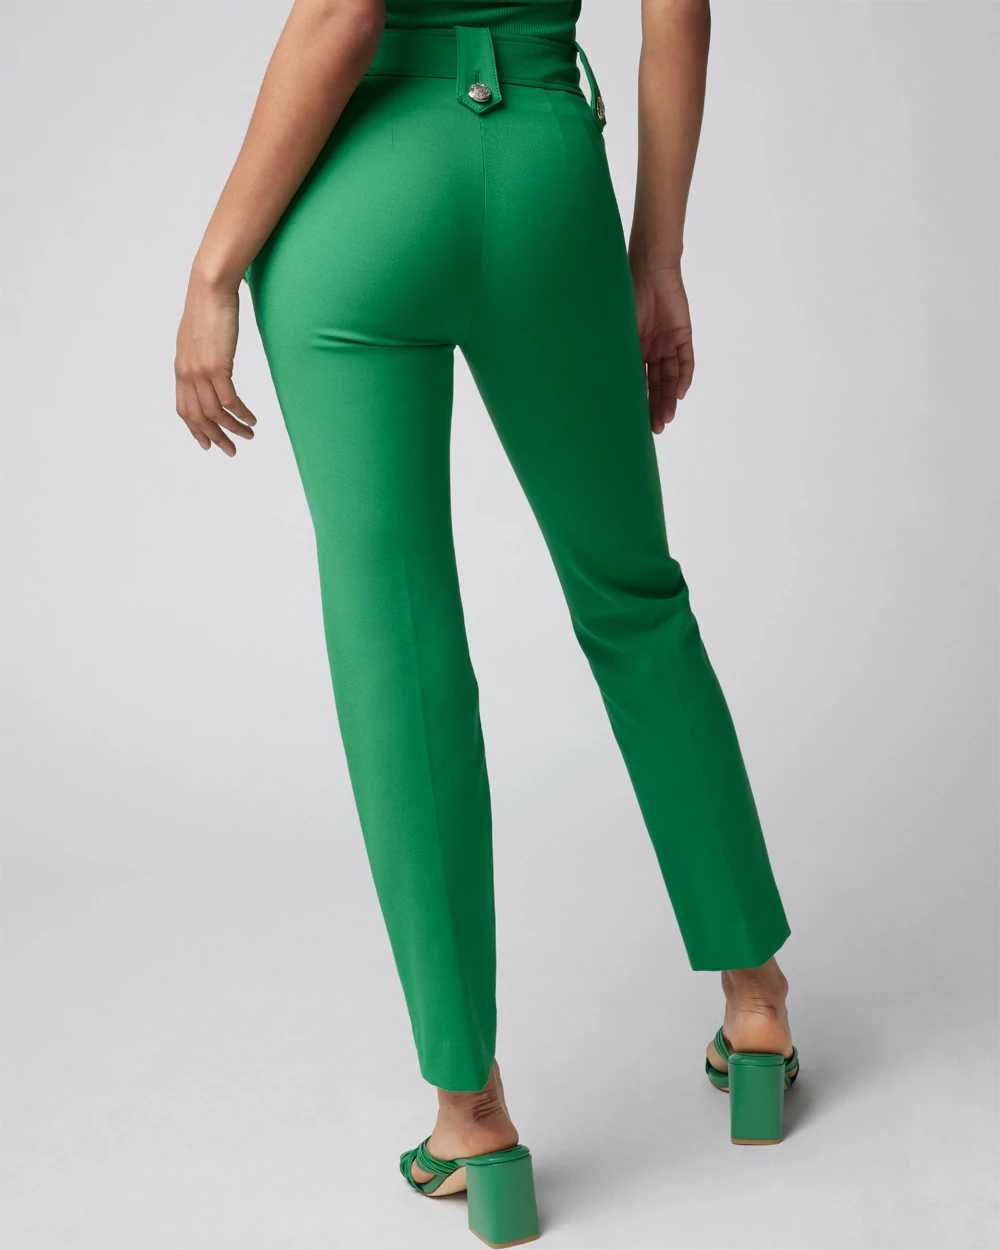 WHBM® Jolie Button Straight Lightweight Comfort Stretch Pant click to view larger image.